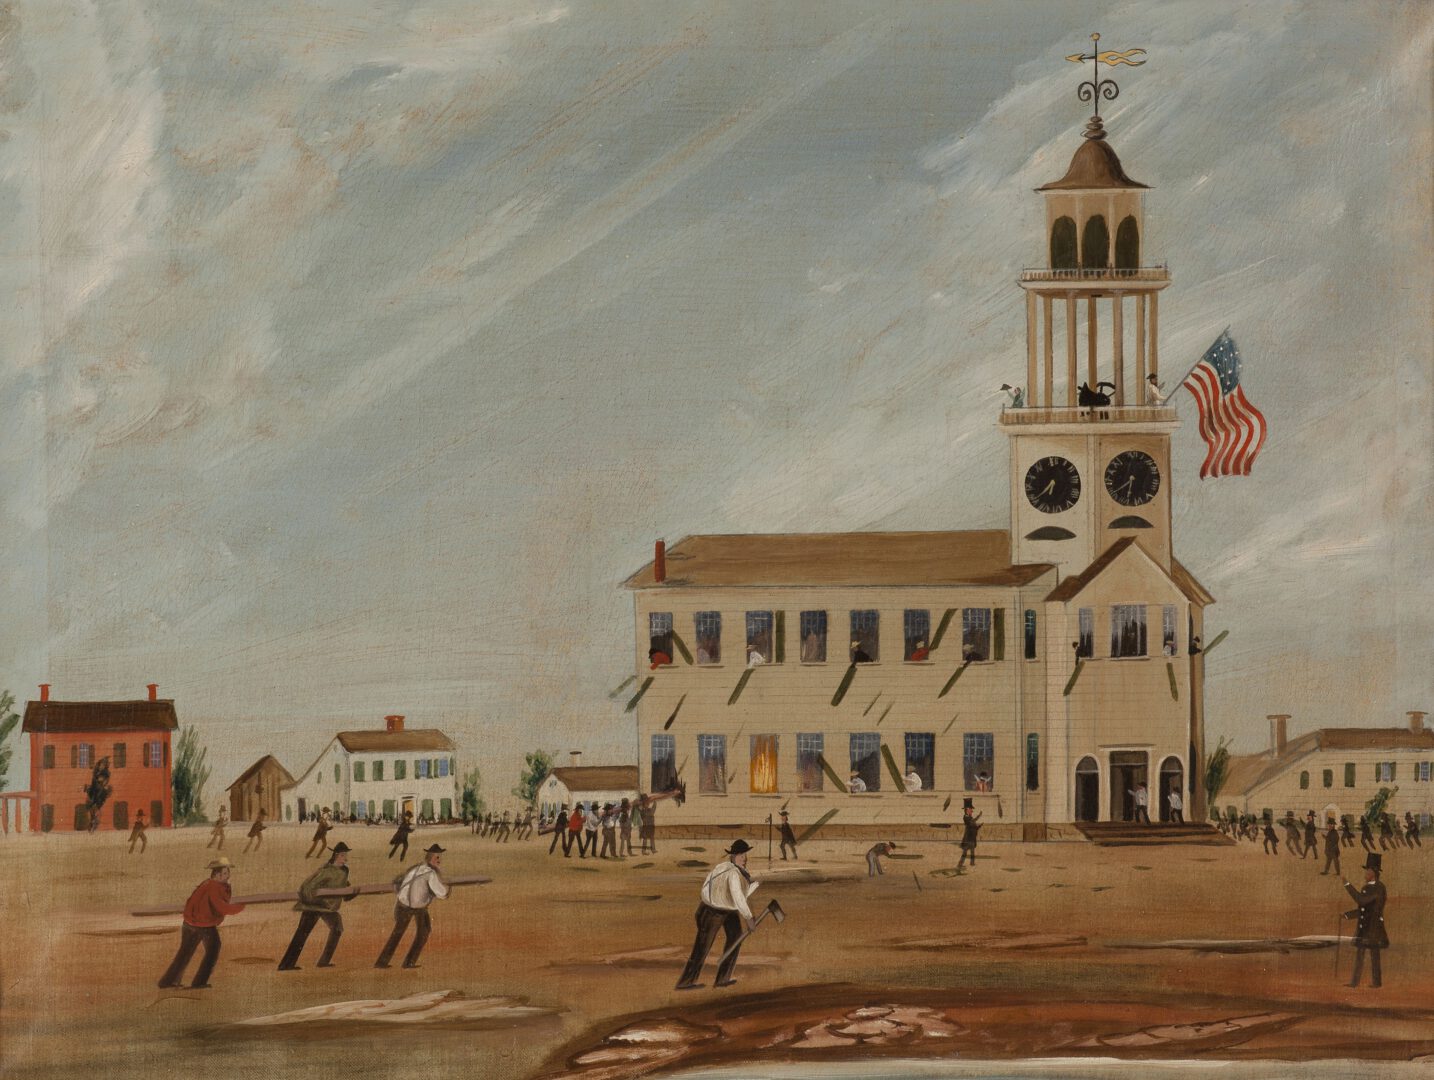 John Hilling (1822-1894), Looting the Old South Church, c. 1854, Oil on Canvas